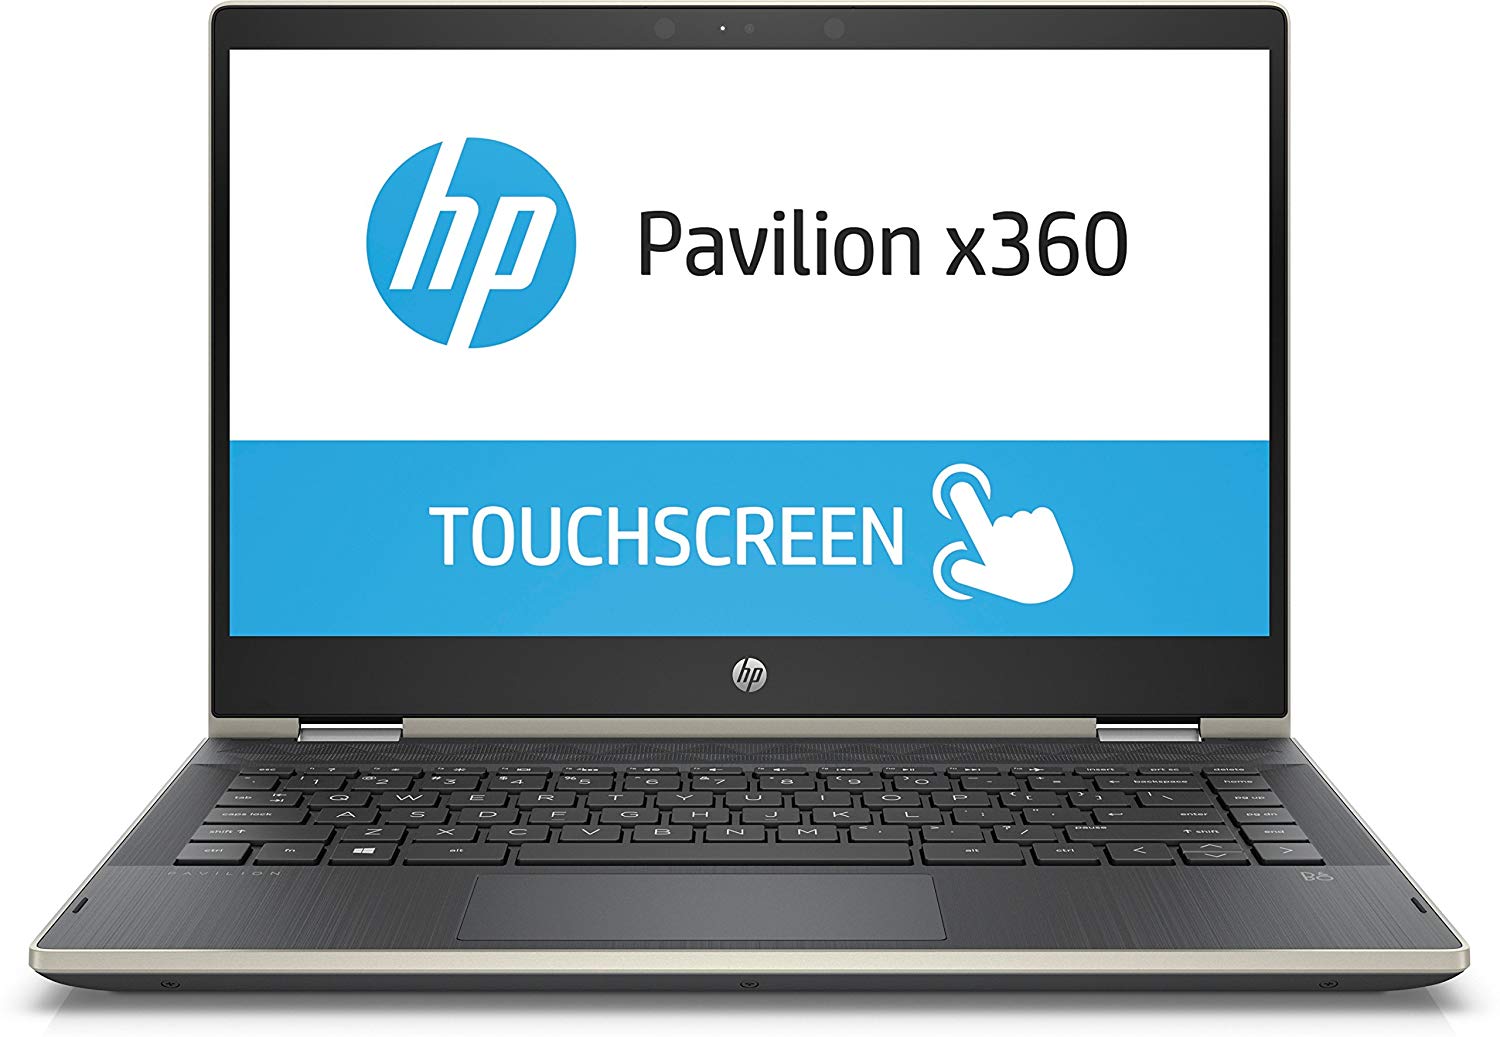 HP Pavilion x360 Core i5 8th gen 14-inch Touchscreen 2-in-1 Thin and Light Laptop (8GB/256GB SSD/Windows 10 Home/Pale Gold/1.67 Kg), 14-CD0081TU